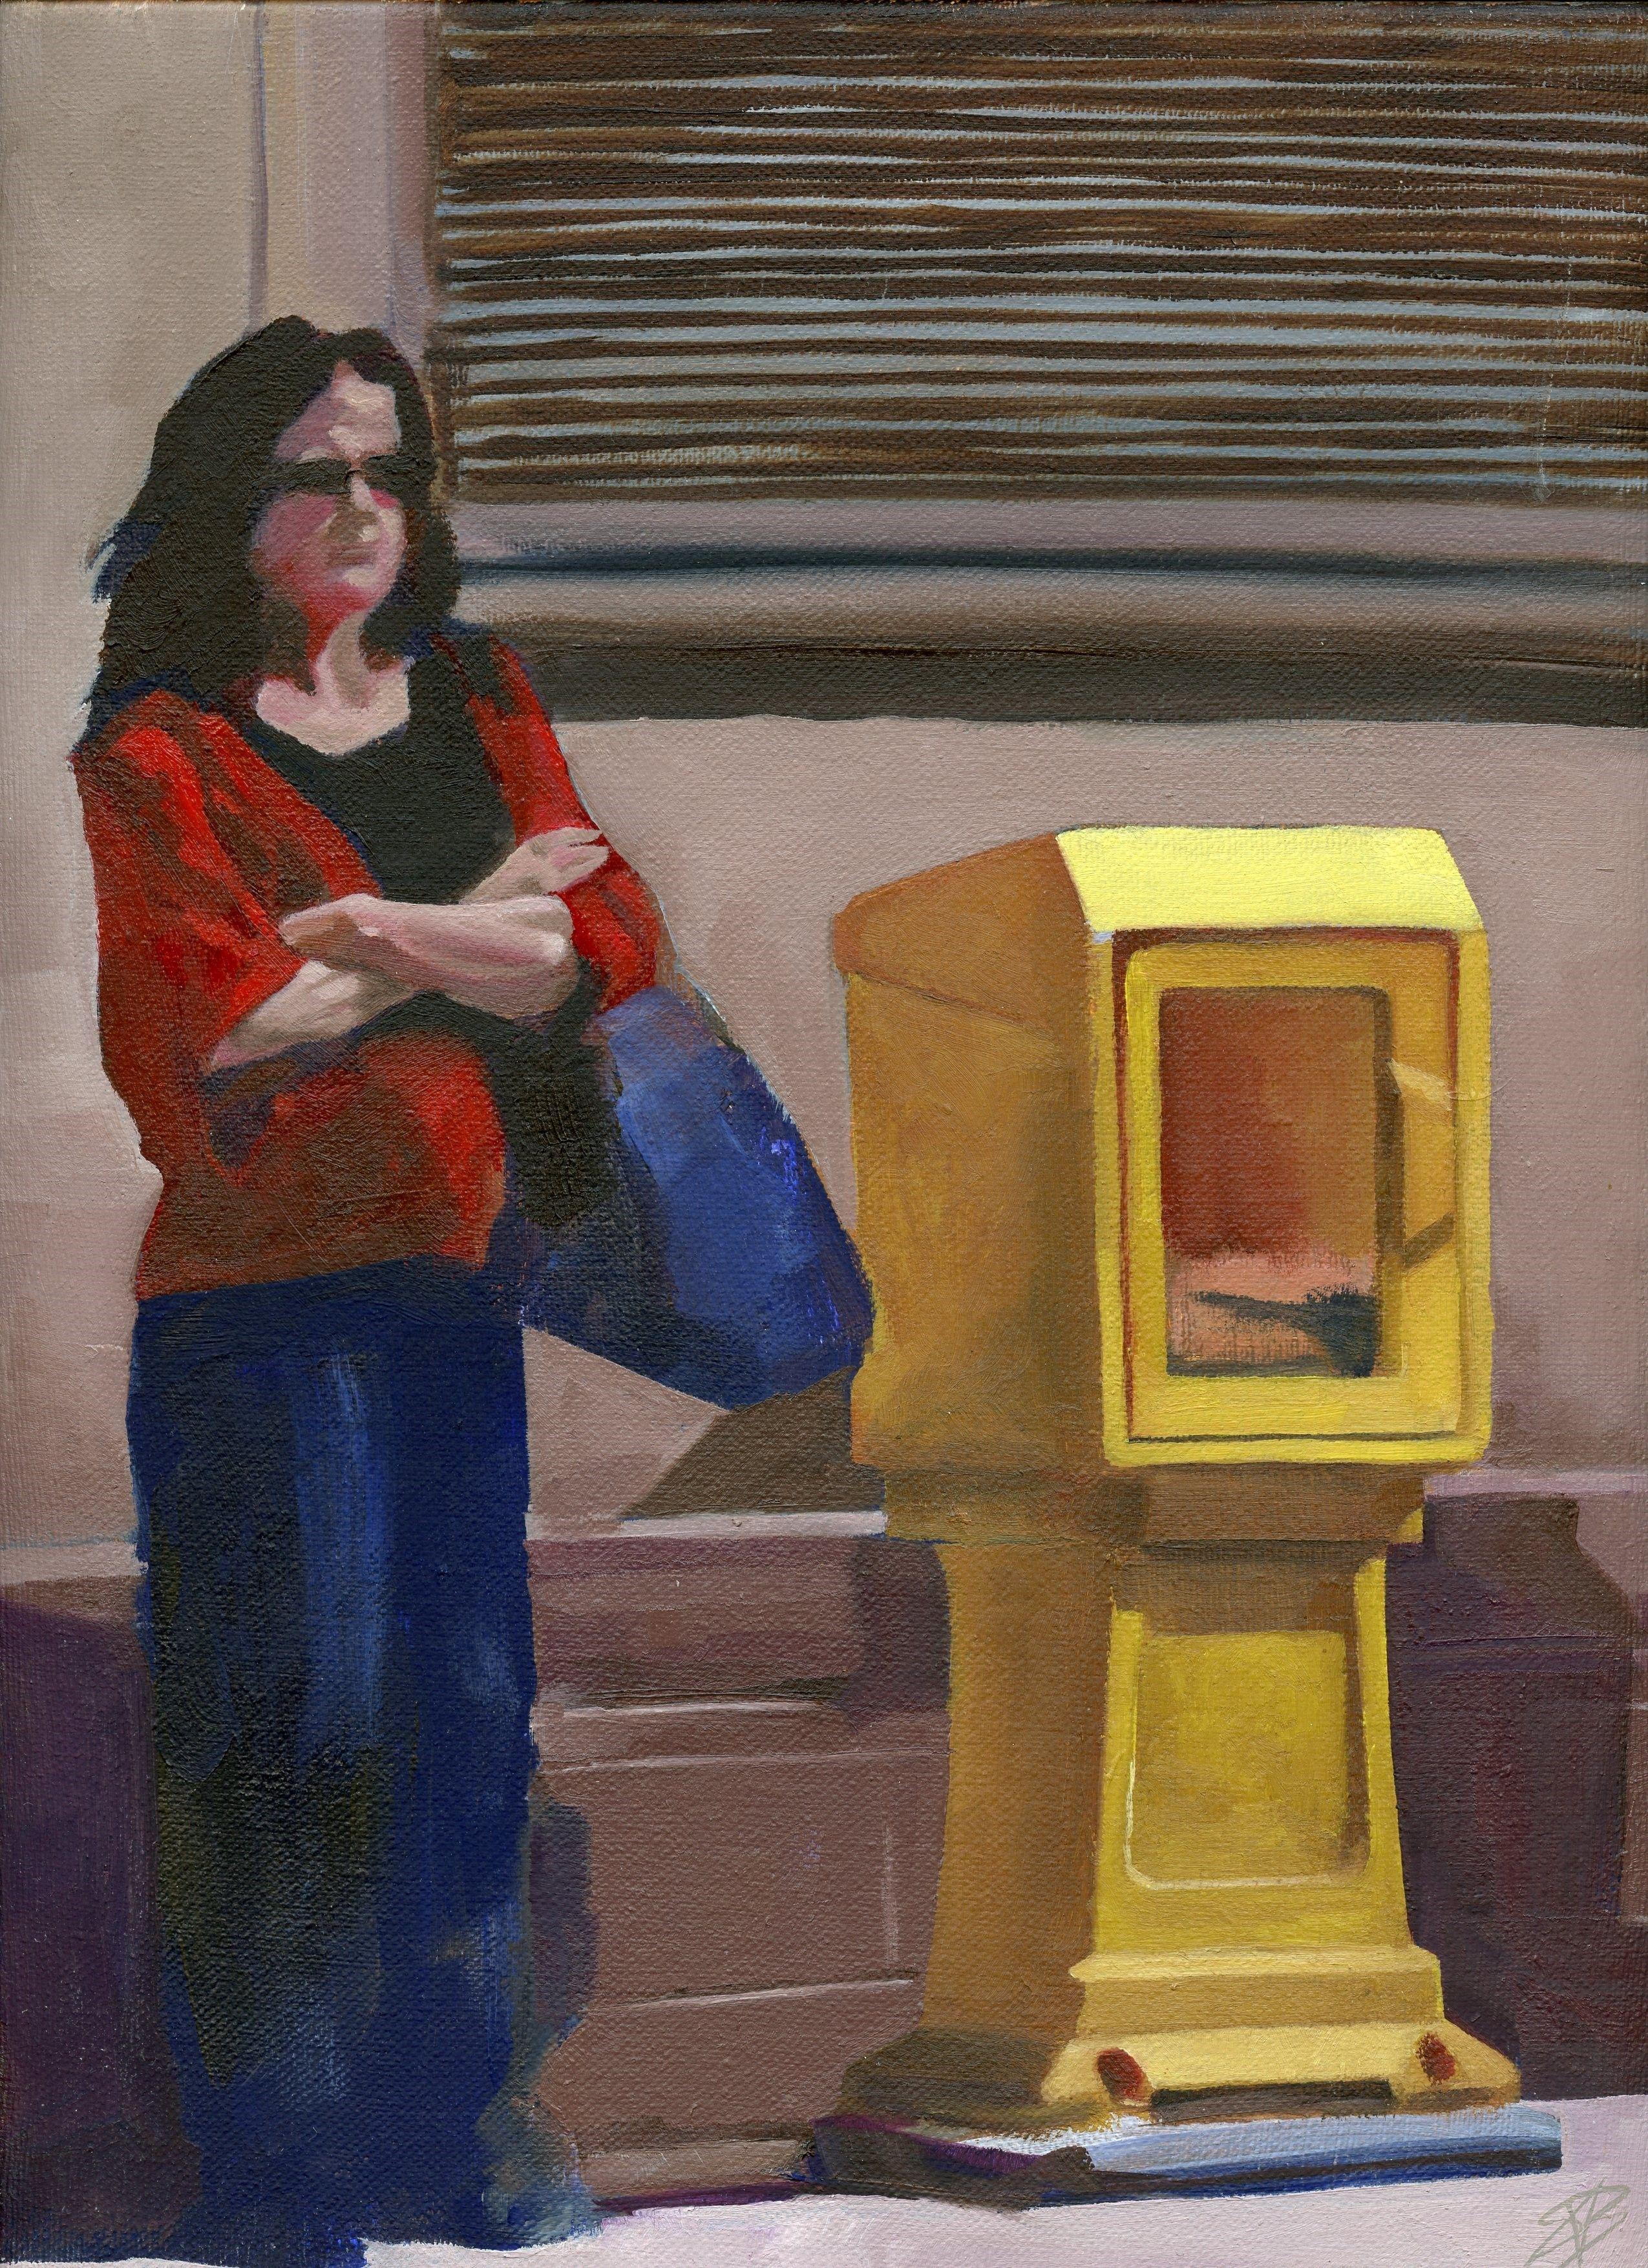 Steven Boksenbaum Figurative Painting - Bus stop 1, Forbes Ave, Painting, Oil on Canvas